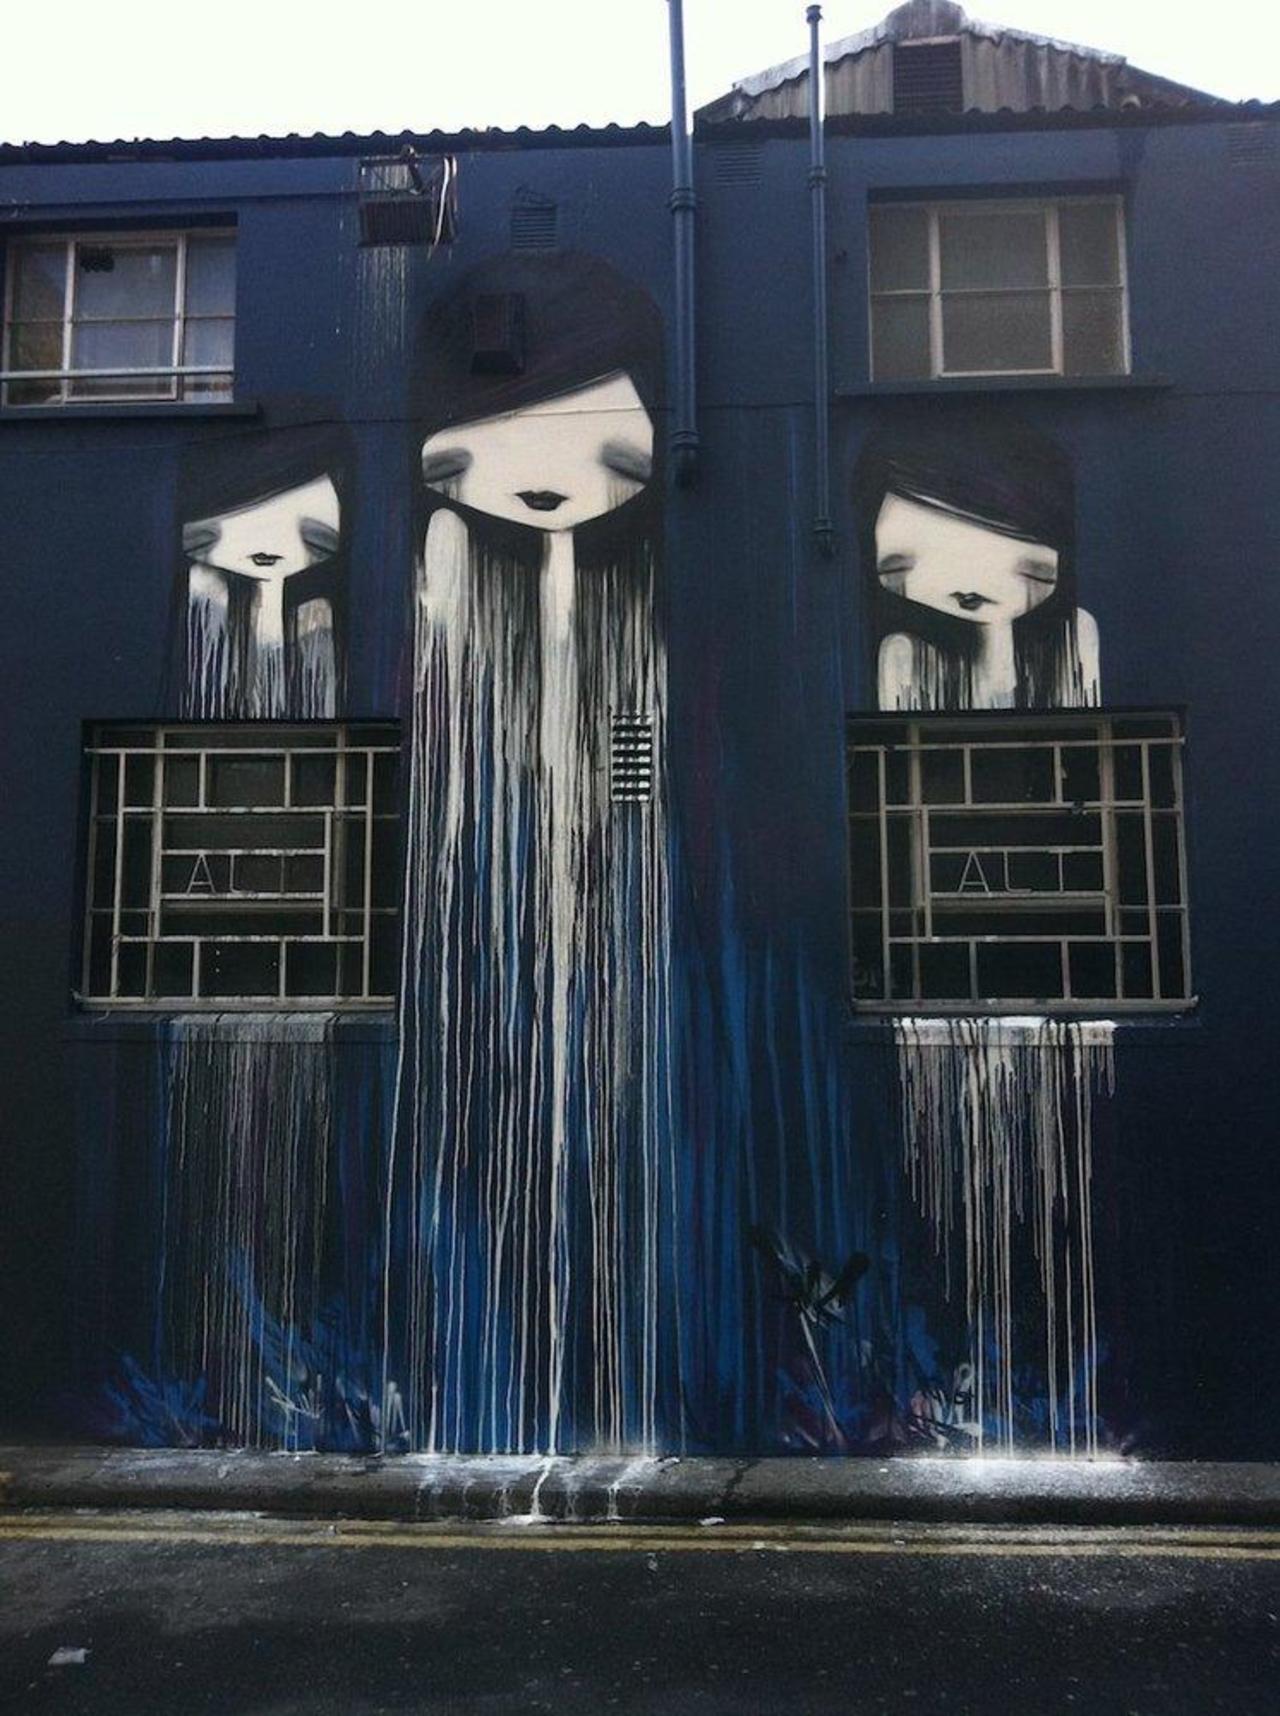 Melting fashion. Check this awesome piece and many more here: http://bit.ly/12kCW43 #graffiti #art http://t.co/jFNjUJhnSe